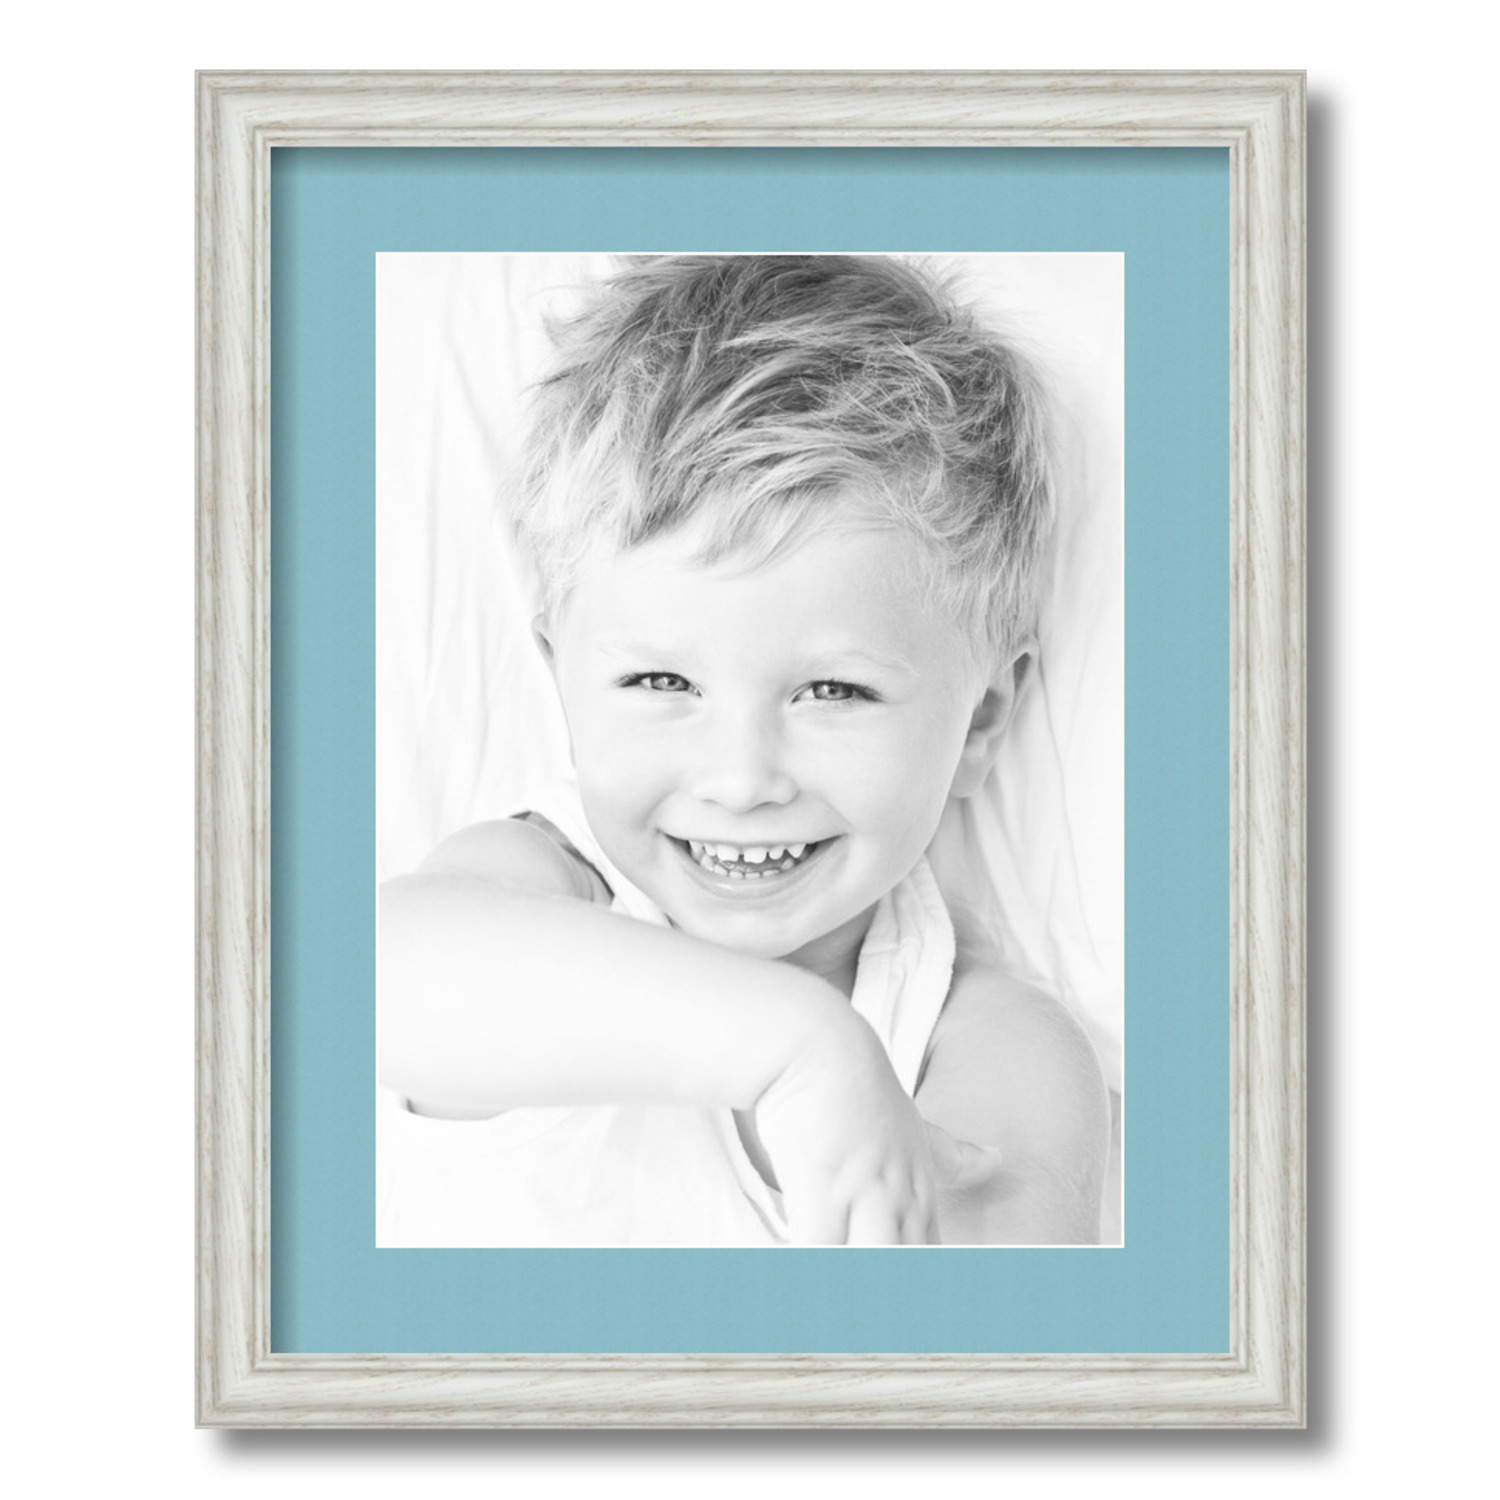 ArtToFrames 16x20 Matted Picture Frame with 12x16 Single Mat Photo Opening  Framed in 1.25 Off White Wash on Ash and 2 French Blue Mat (FWM-4098-16x20)  